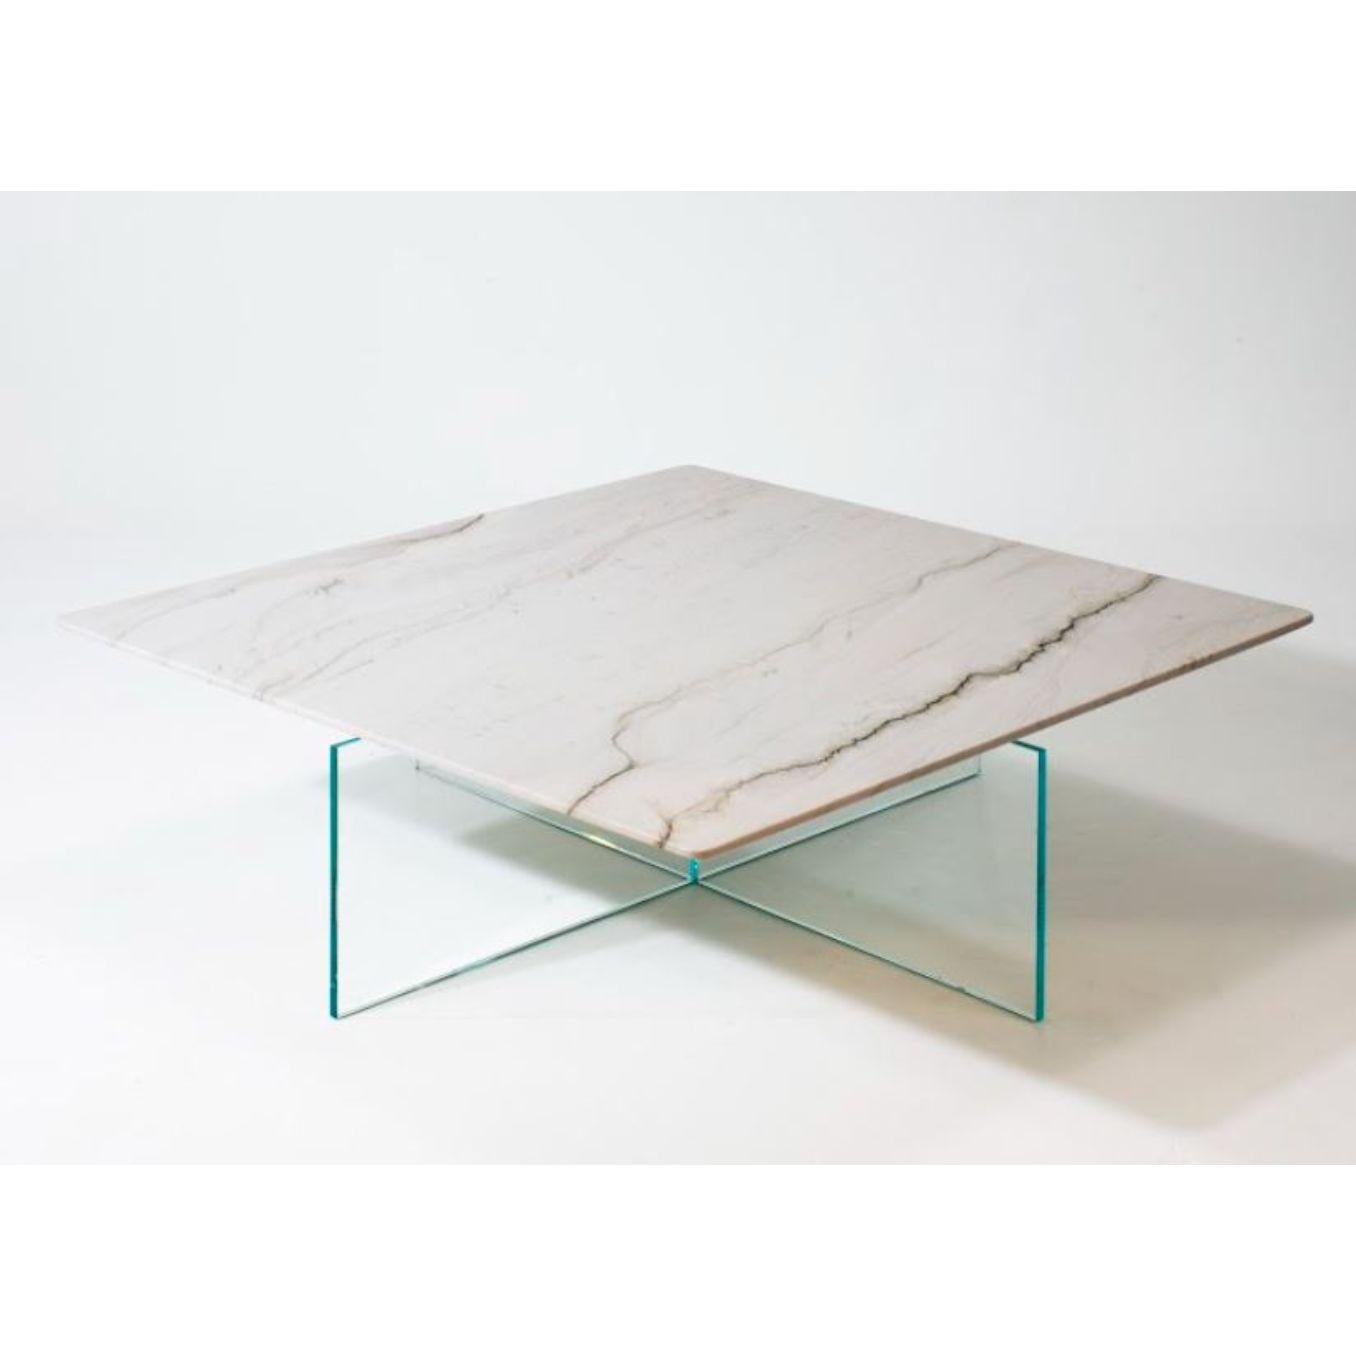 Beside Myself Square Coffee Table by Claste 
Dimensions: D 106.7 x W 106.7 x H 35.6 cm
Material: Marble, Glass
Weight: 145 kg

Since 2017 Quinlan Osborne has cultivated an aesthetic in his work that is rooted in the passion for contemporary design